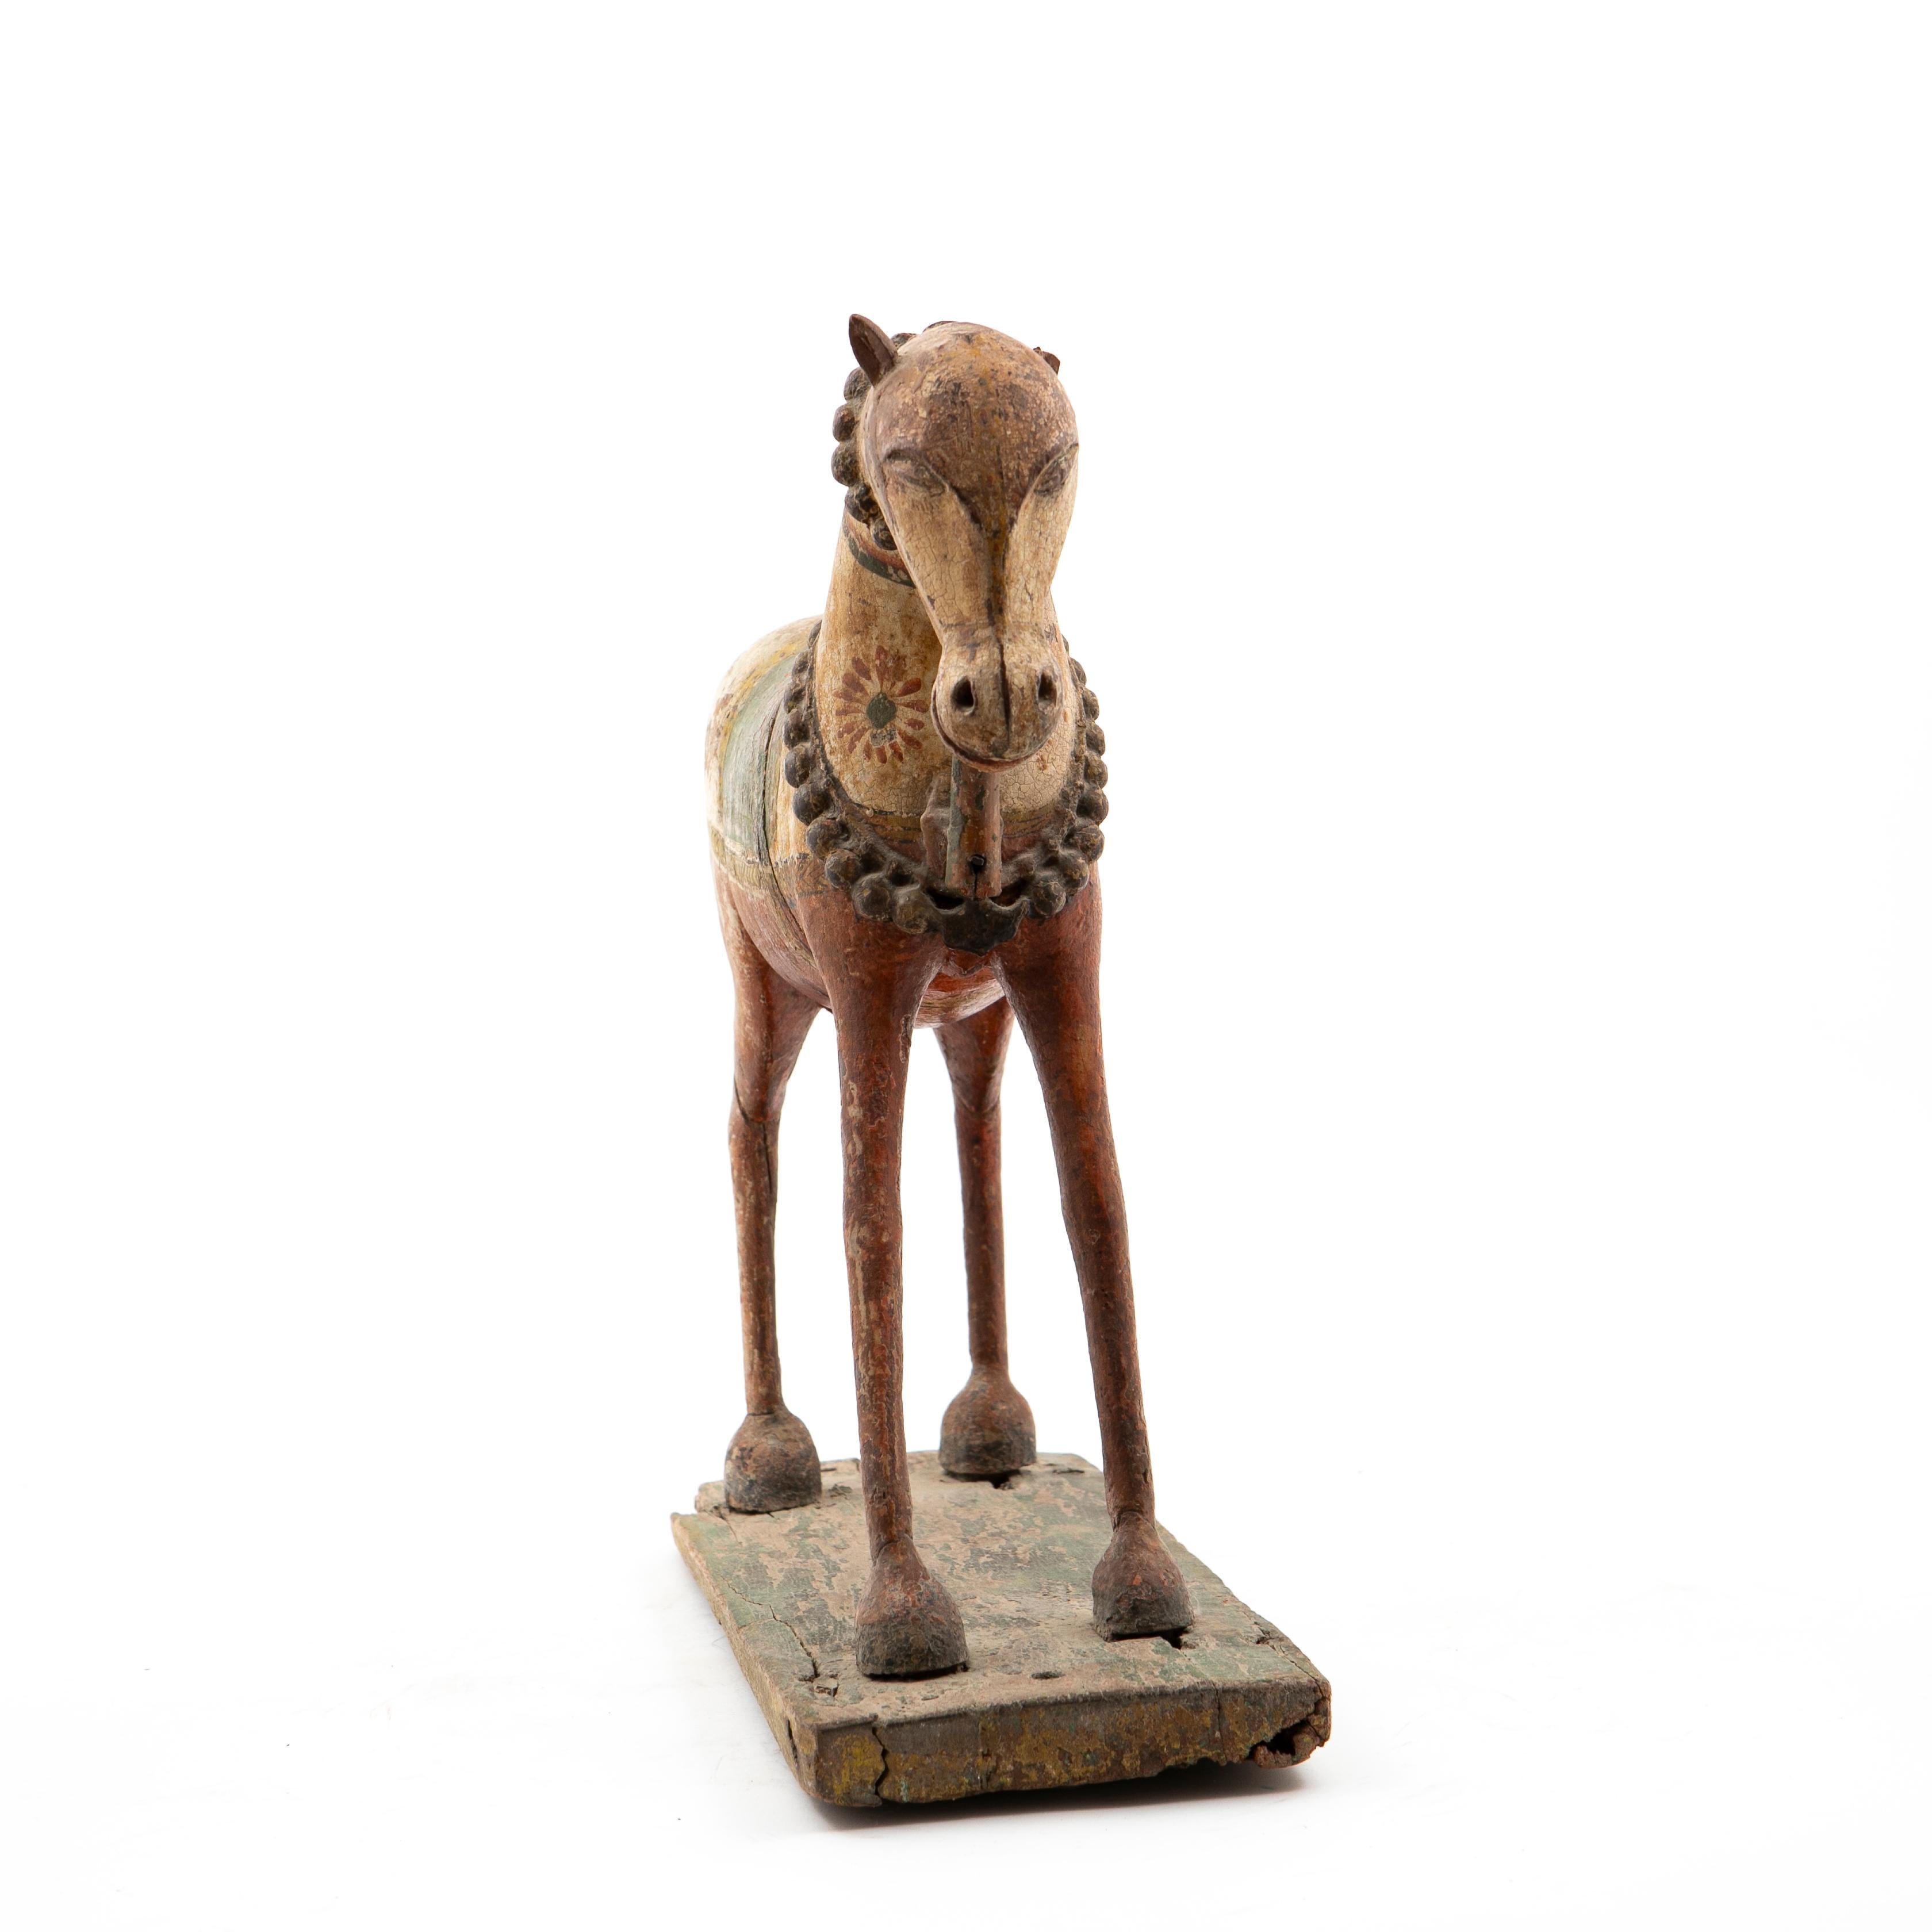 A Indian 18-19th century hand-carved wooden horse decorated with polychrome colors.
In original untouched condition with a beautiful age-related patina, showing the antique authenticity of this piece.

Very charming. One ear is missing.
India,